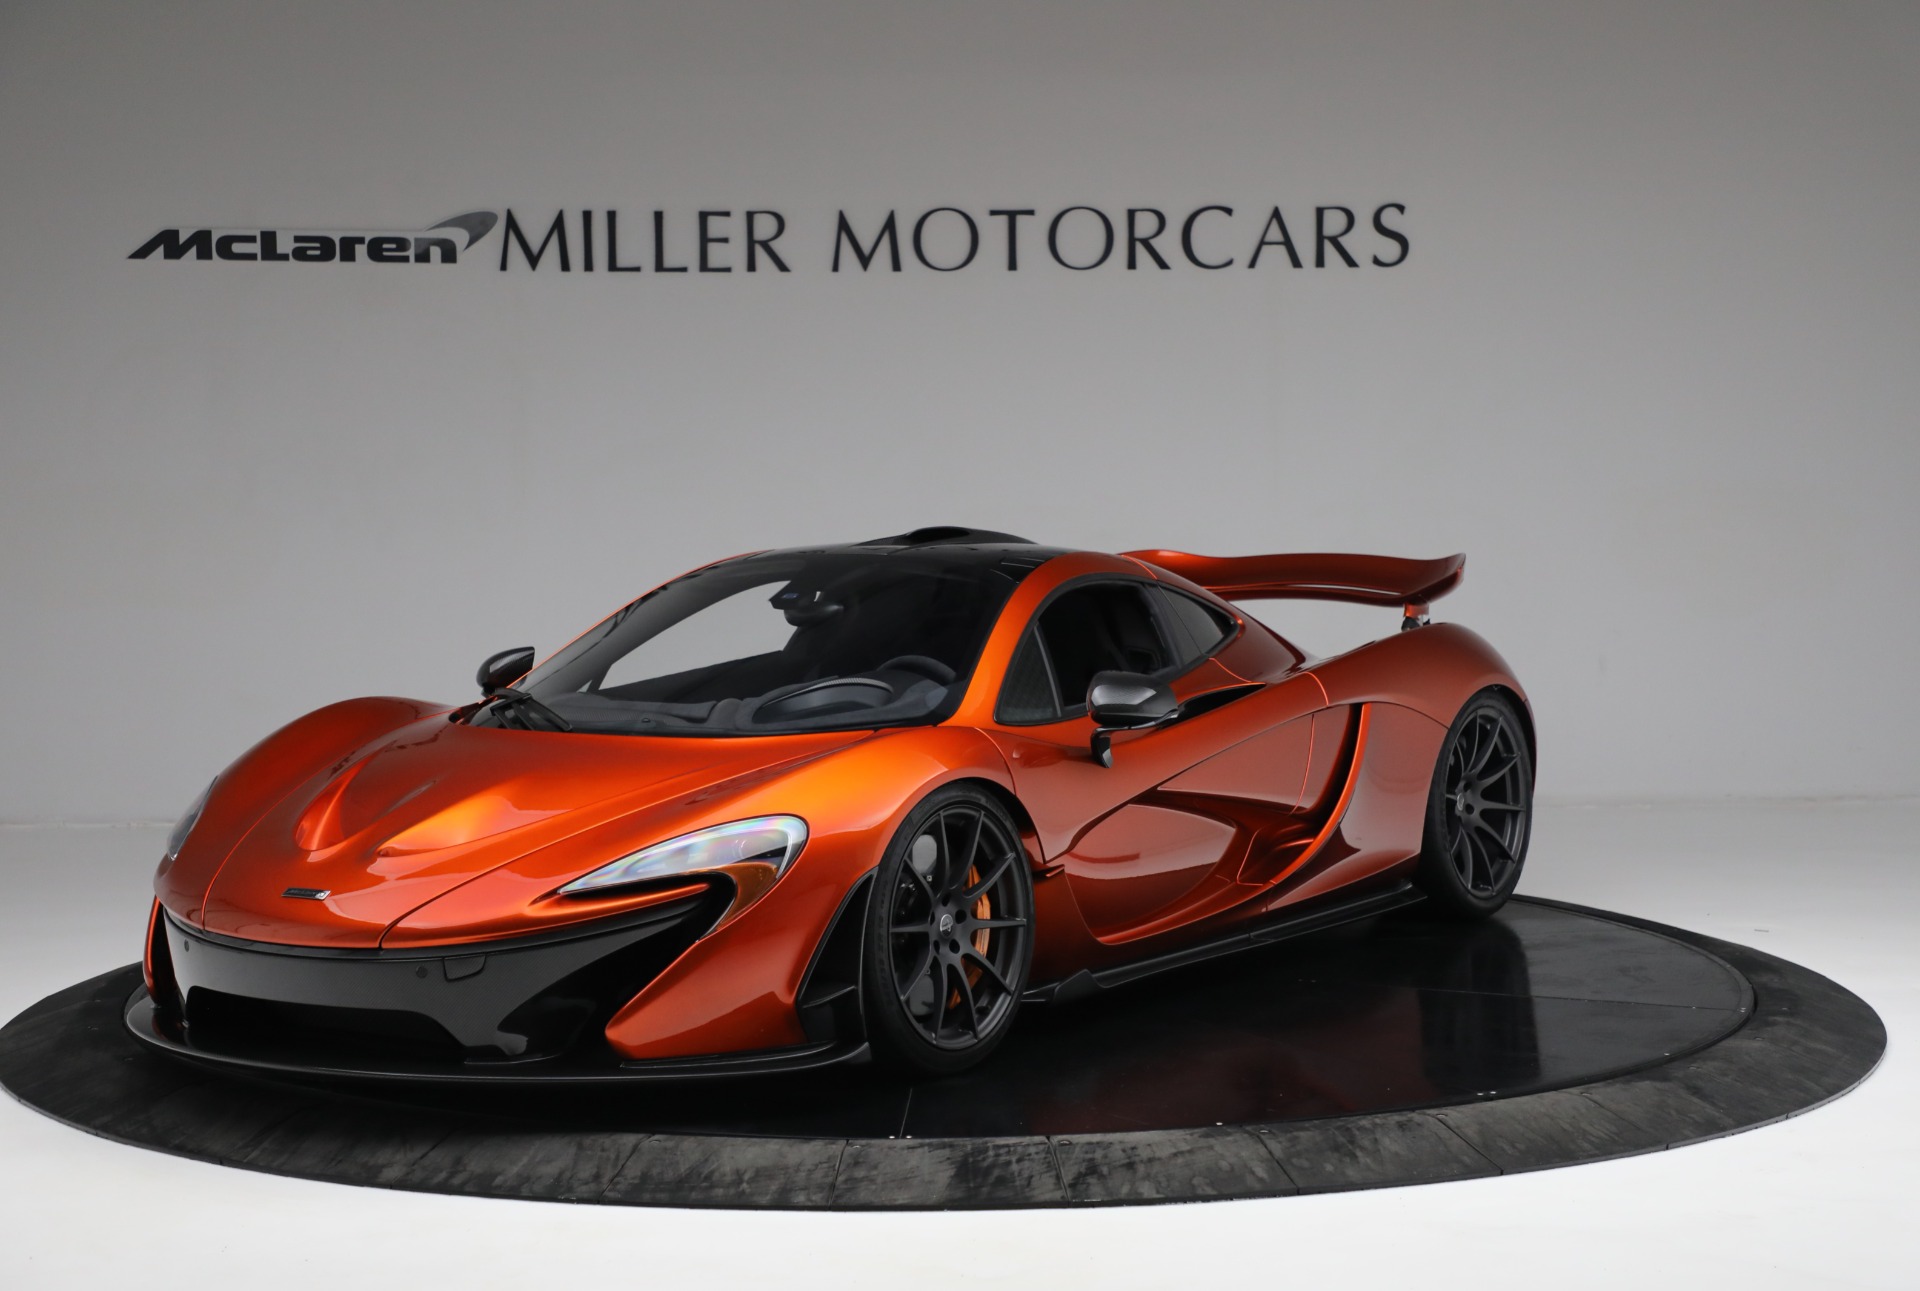 Used 2015 McLaren P1 for sale $2,000,000 at Pagani of Greenwich in Greenwich CT 06830 1